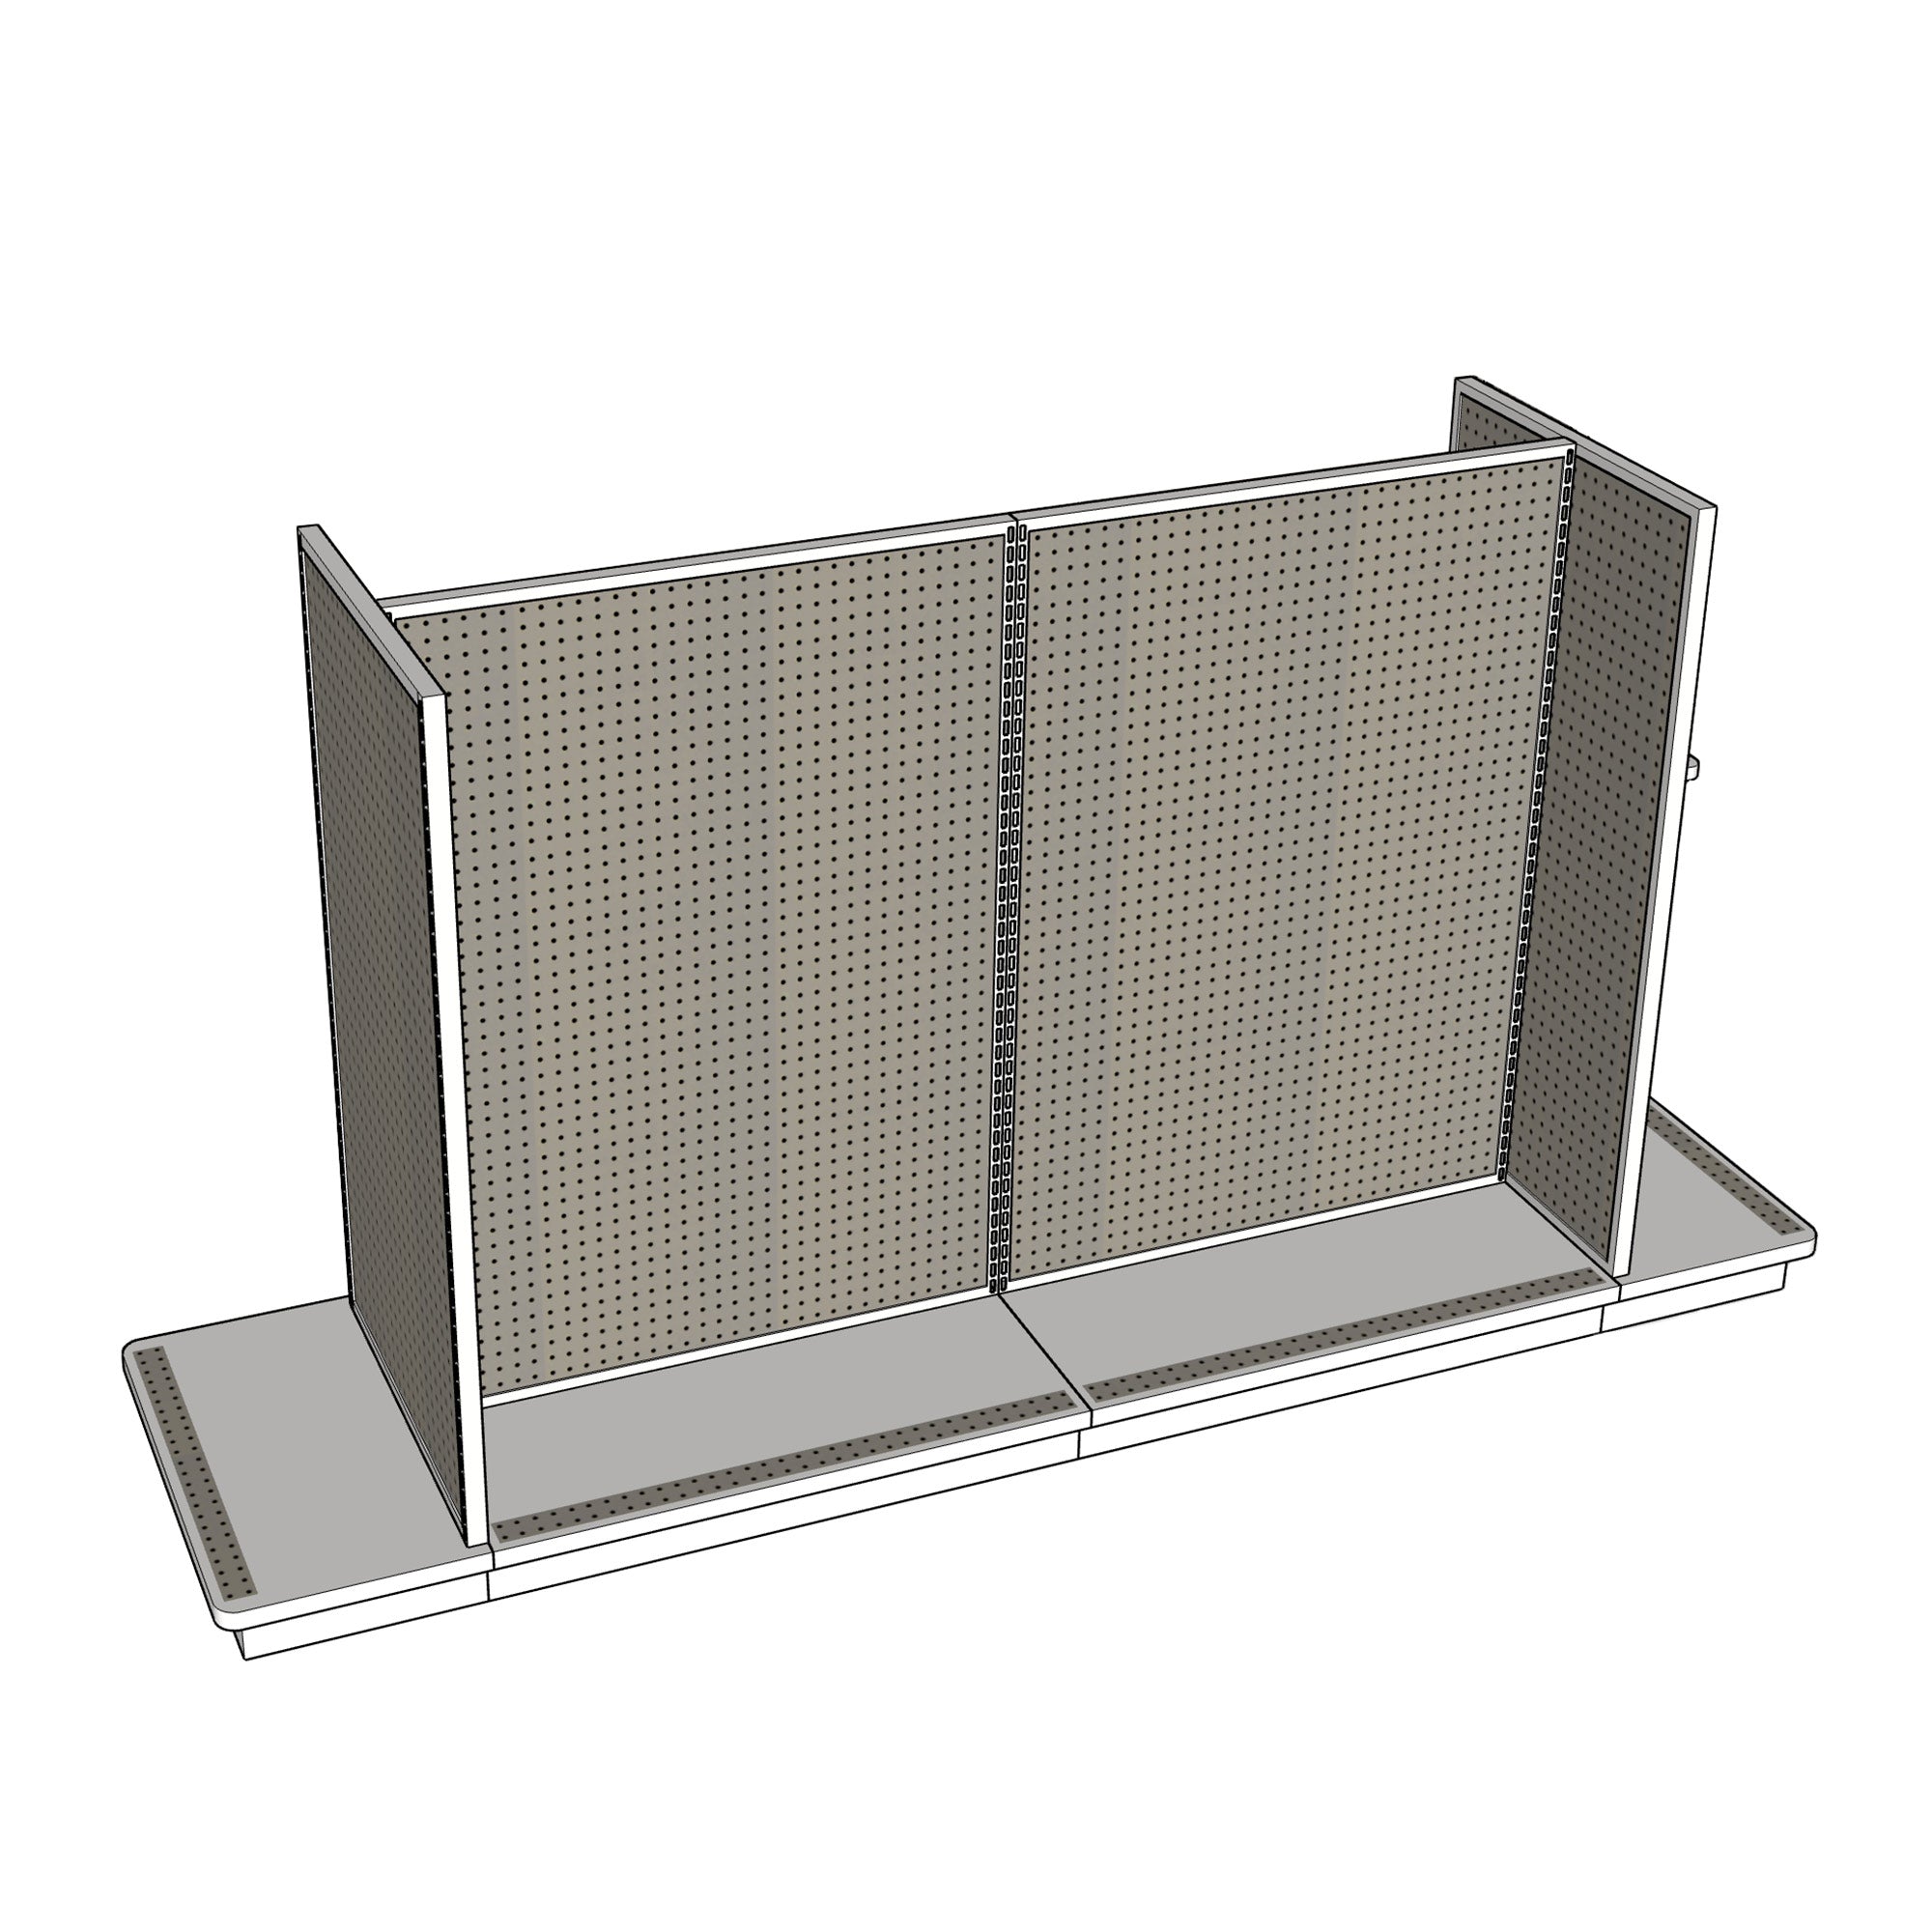 pegboard gondola store shelving unit with 2 end caps